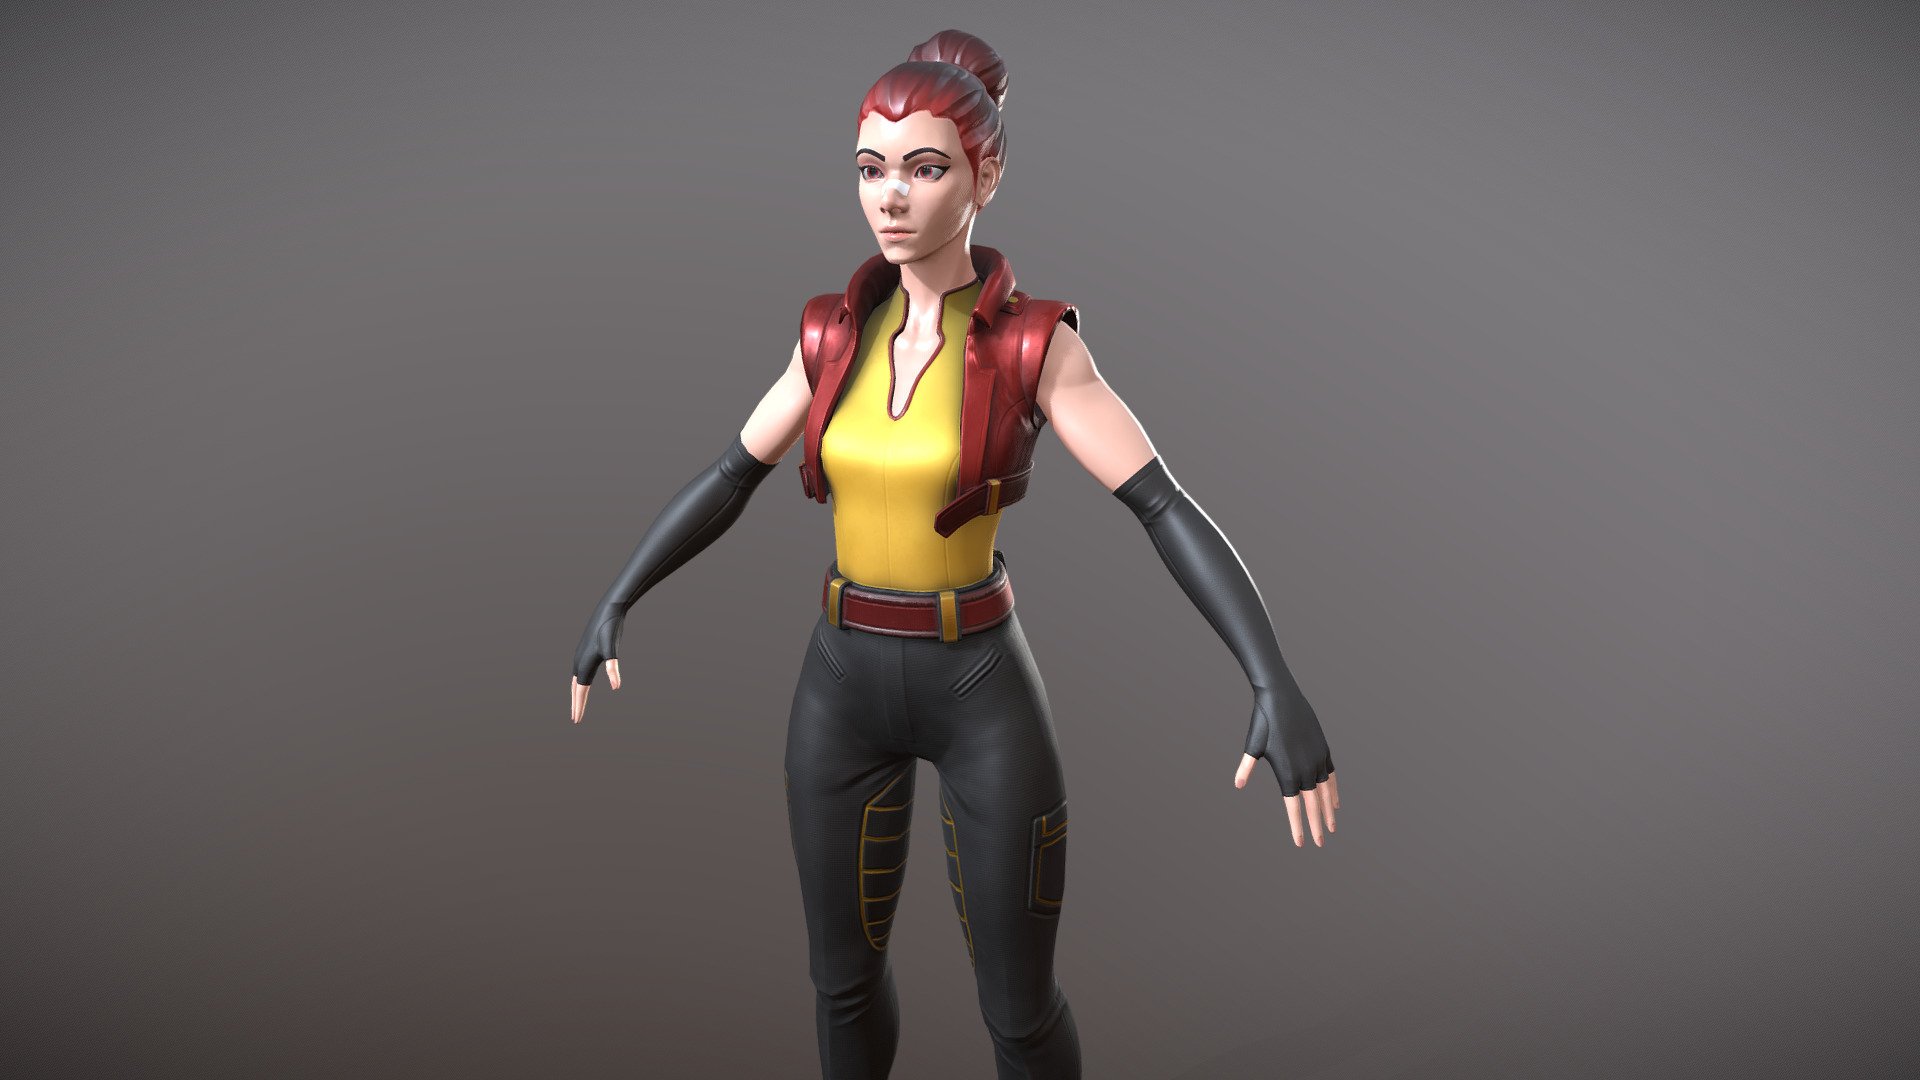 Character model from school exam. First full character I've ever made from start to finish.
Sadly because of time constraint and a lot of setbacks, I had to scope down the design and sculpt, taking away a lot of planned details.
Did a lot of mistakes, and I can see how I need to focus more on nailing the low poly topology, to get better baking results in the future.

I'm not completely content with the result, but I've learned a LOT, that I can hopefully channel into better results next time 3d model